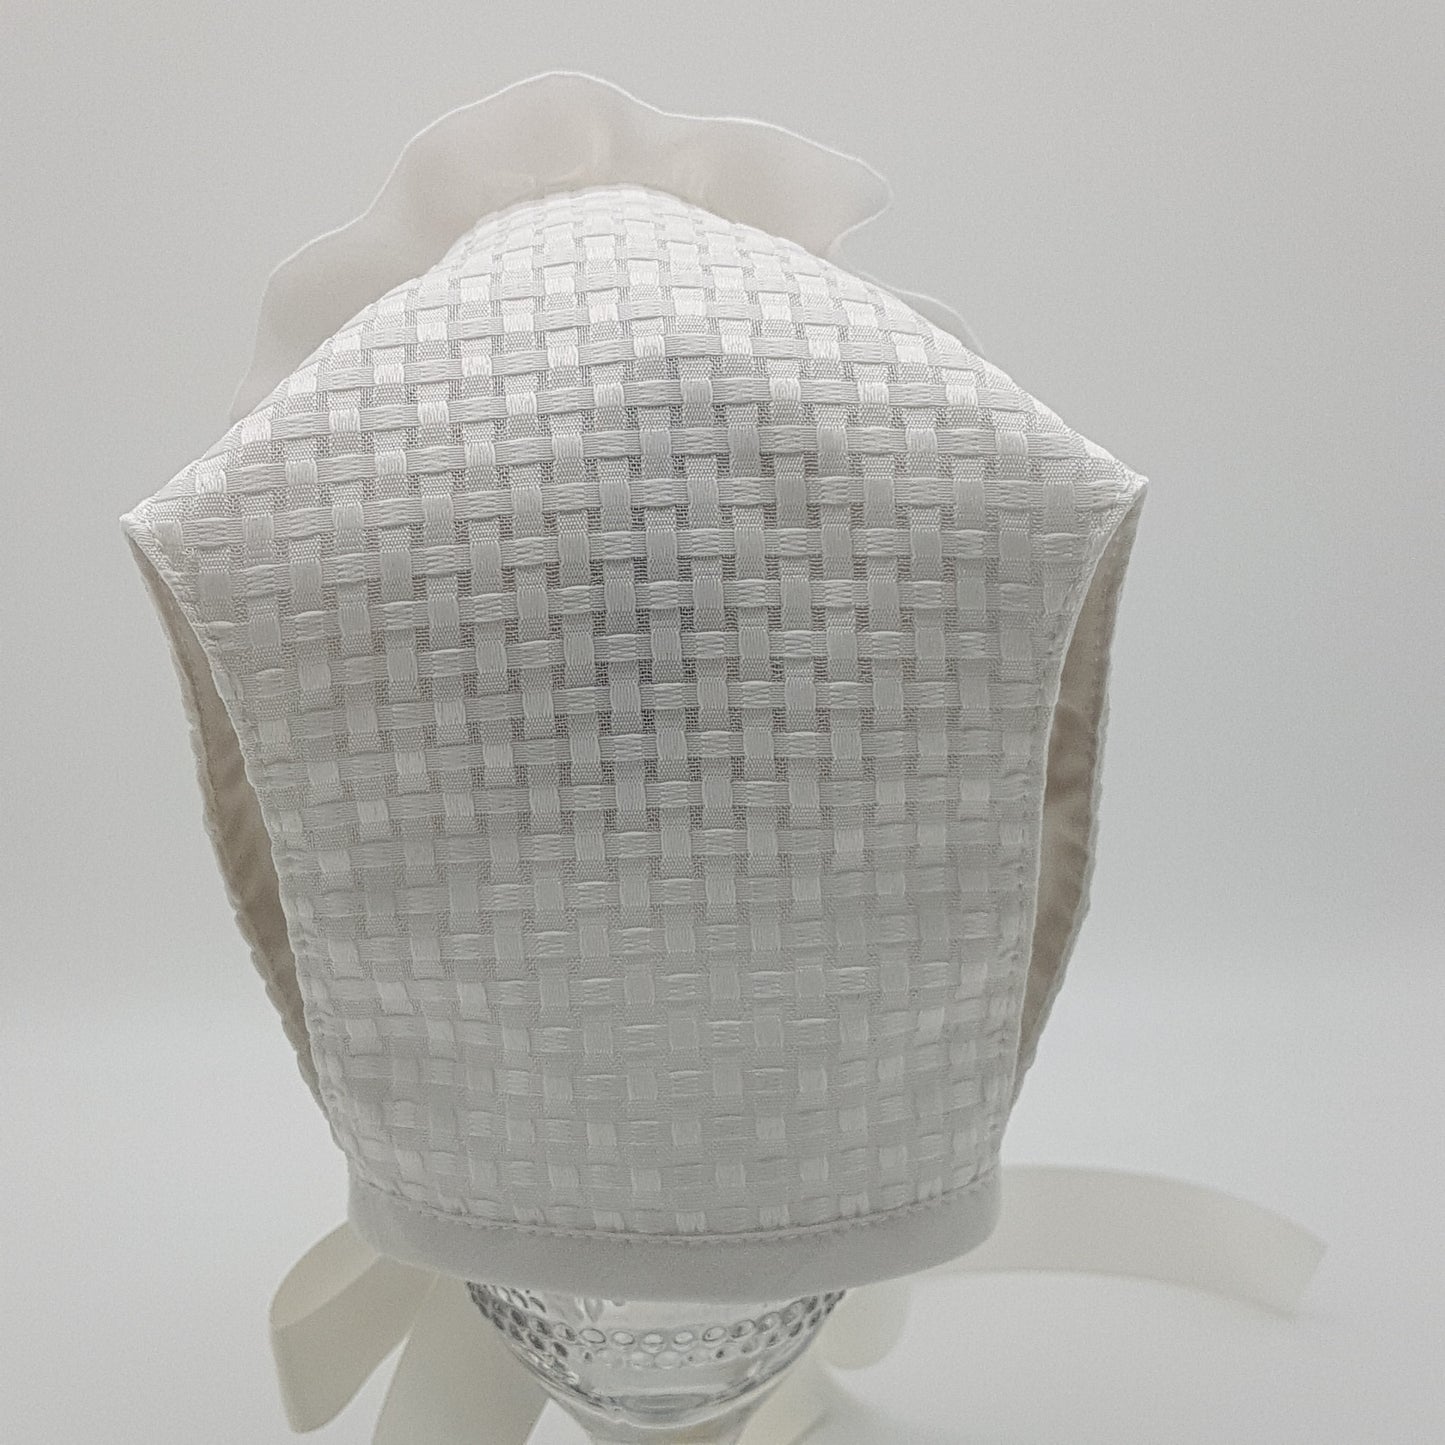 Exclusive Bonnet, Ivory Checkerboard T-Bar Style Bonnet with frill